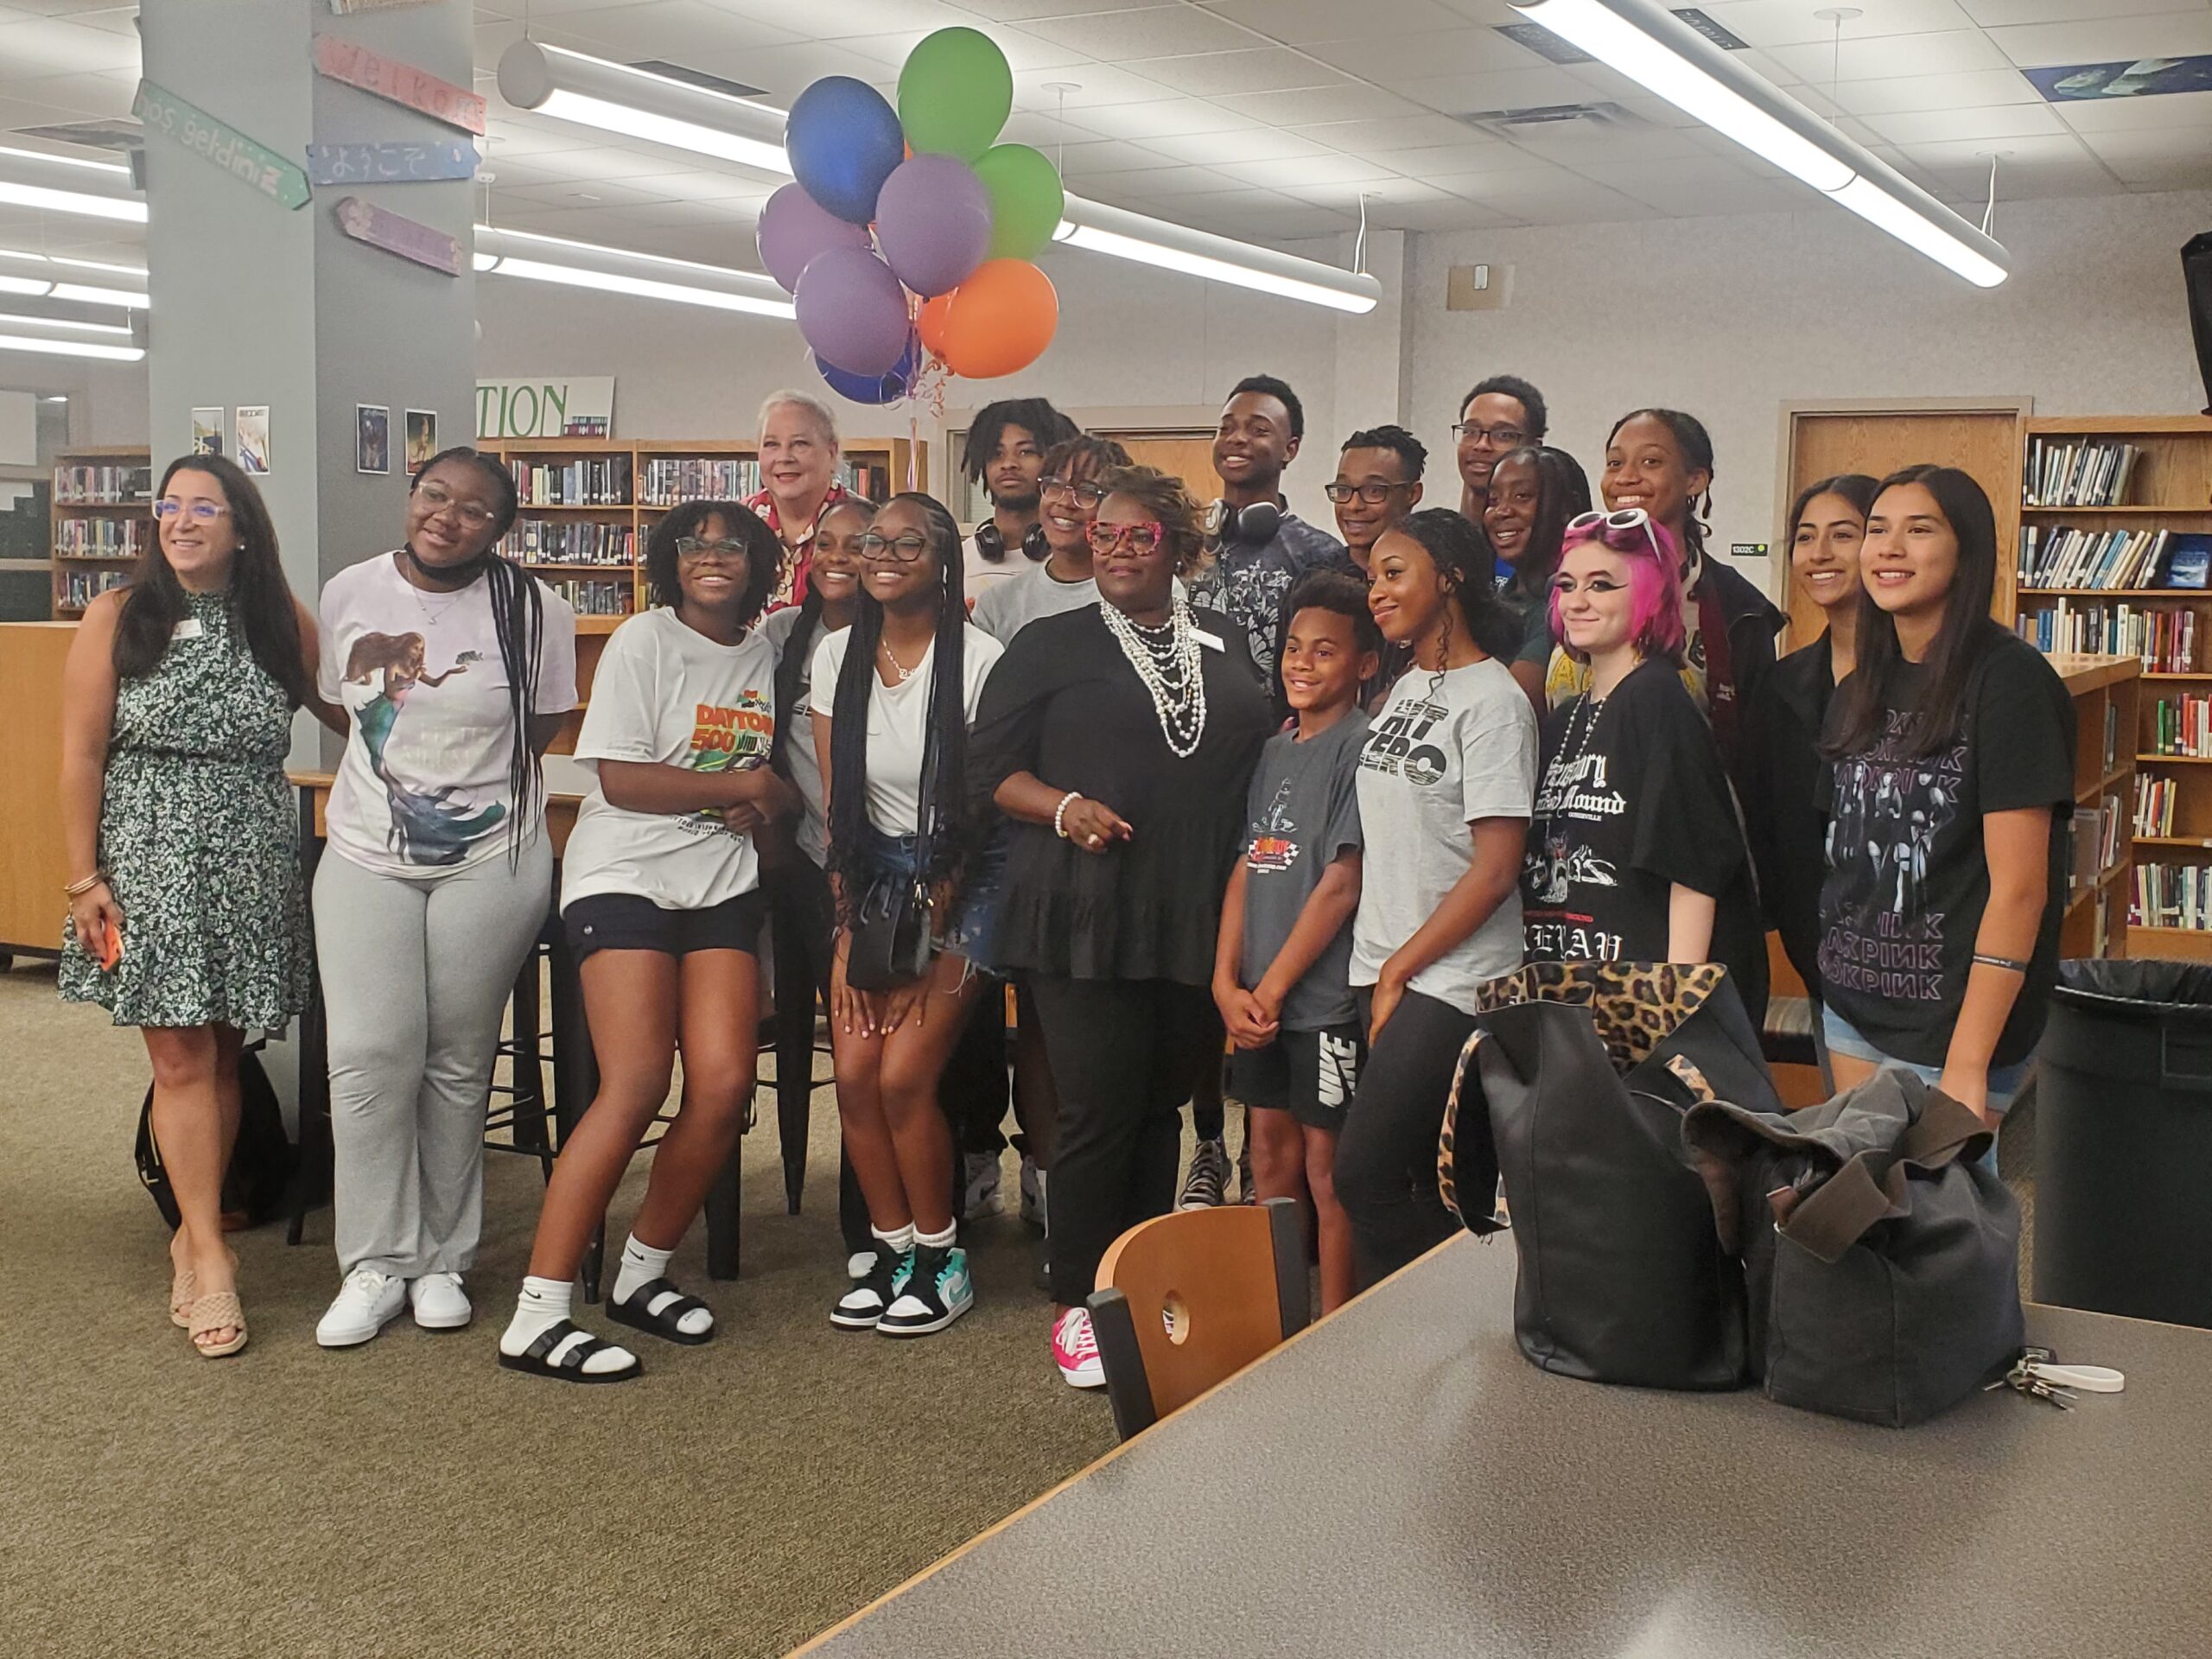 Shaconda Jarman of Enloe High School receiving her award surrounded by her students, inside a library, with the Poe Center's Executive Director Ann.